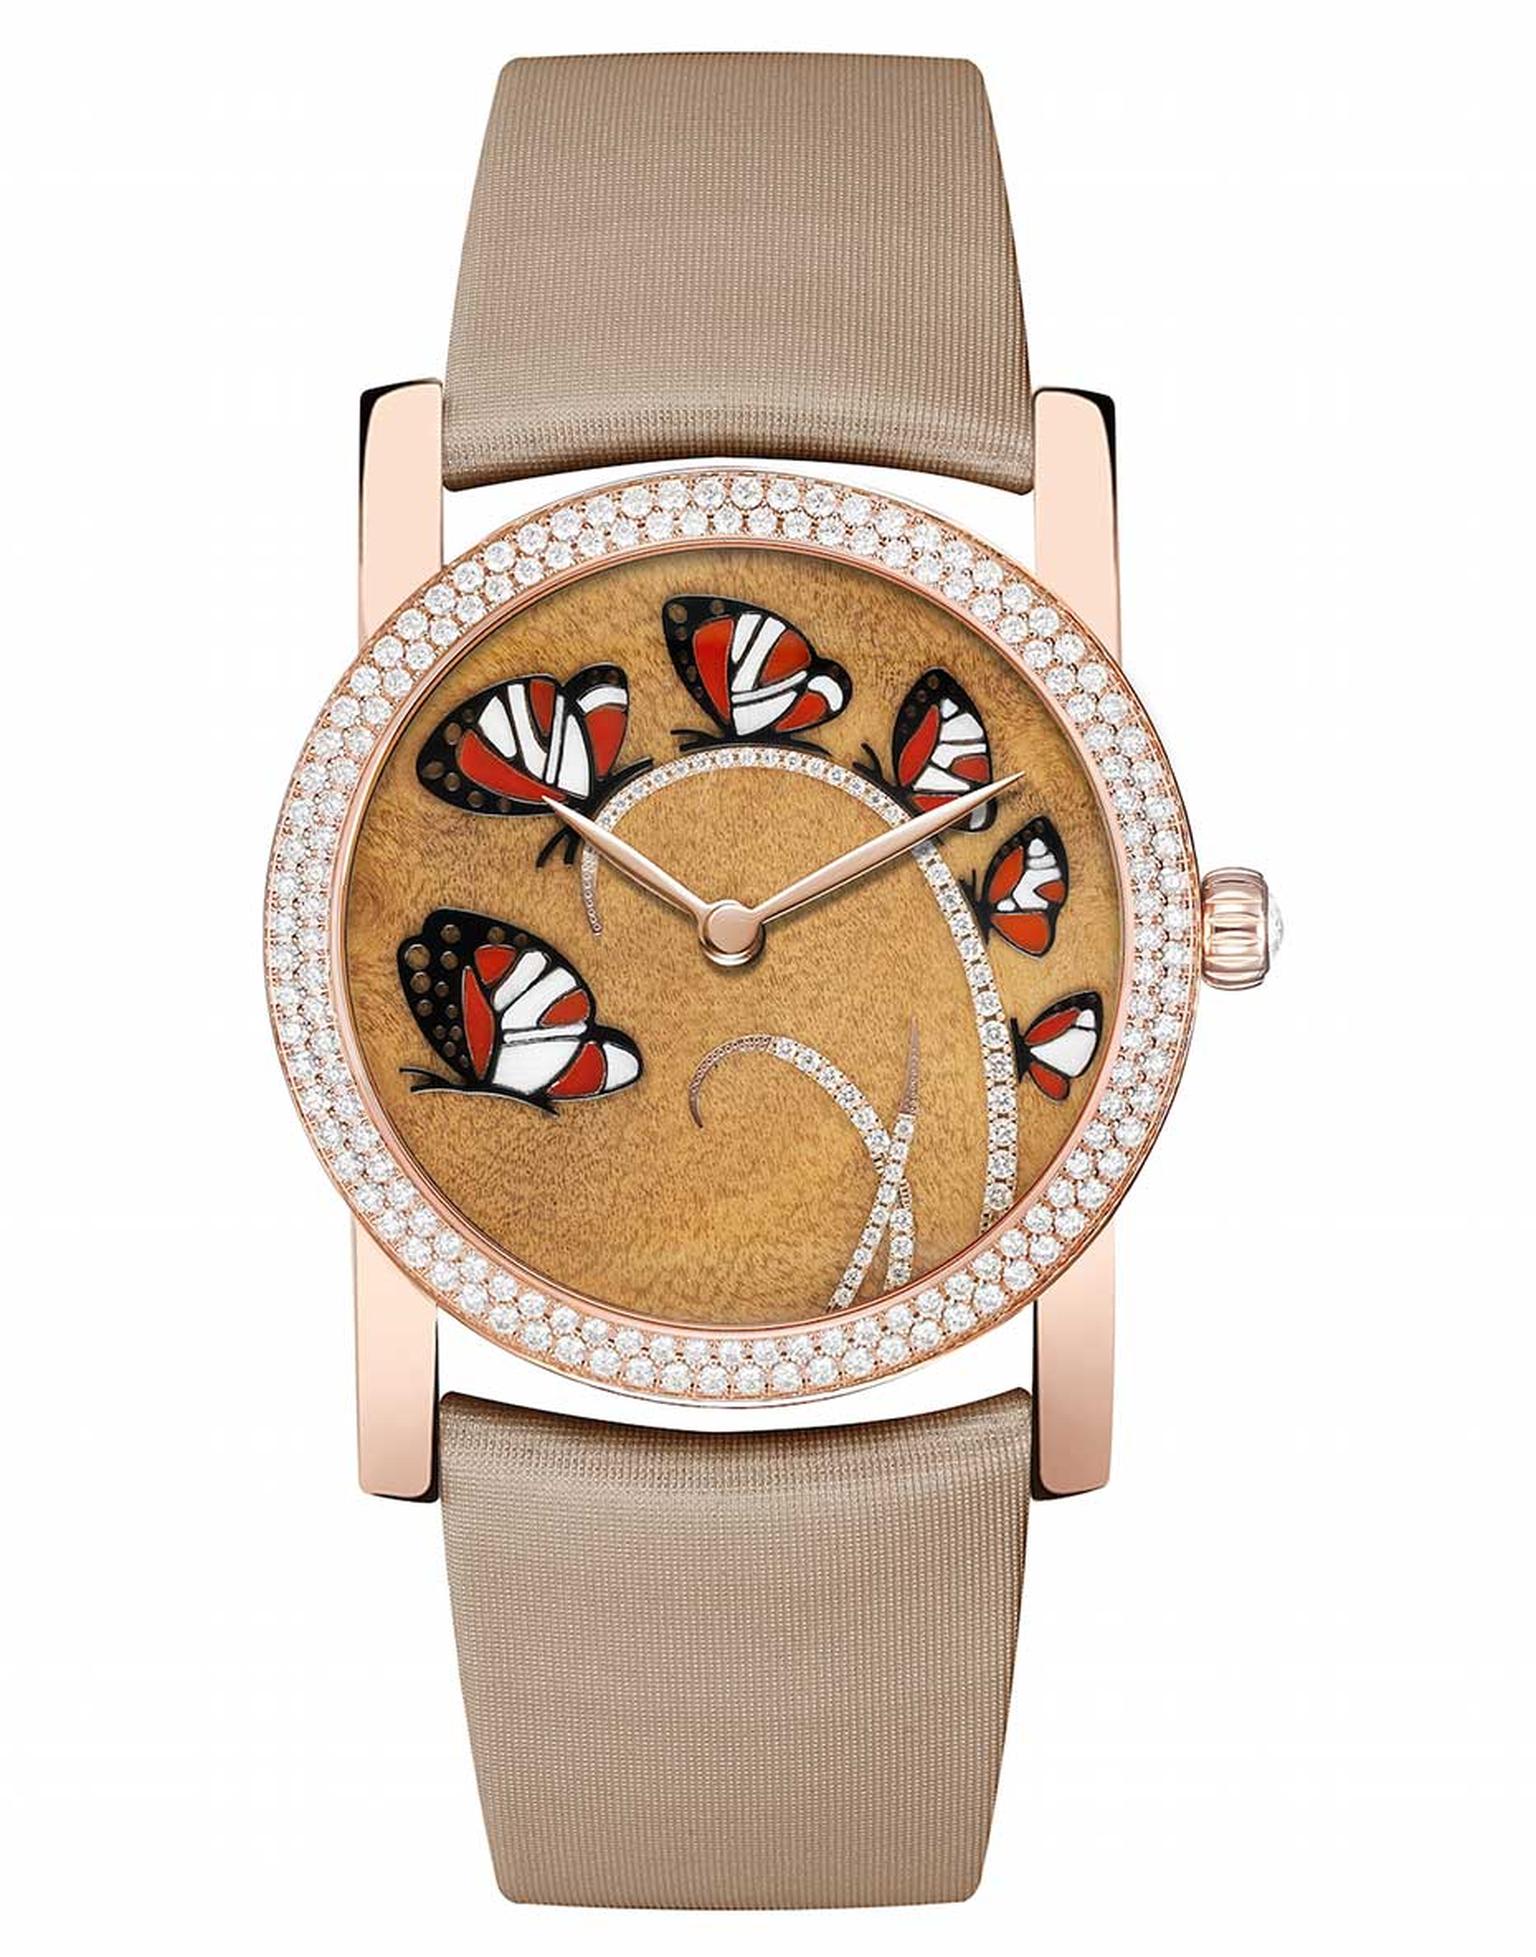 Chaumet Attrape-moi...si tu m'aimes (Catch me...if you love me) watch in pink gold, with a dial decorated with six butterflies set against a precious myrtle burl wood background. The butterfly wings are made from inlaid red carnelian, white wood and black